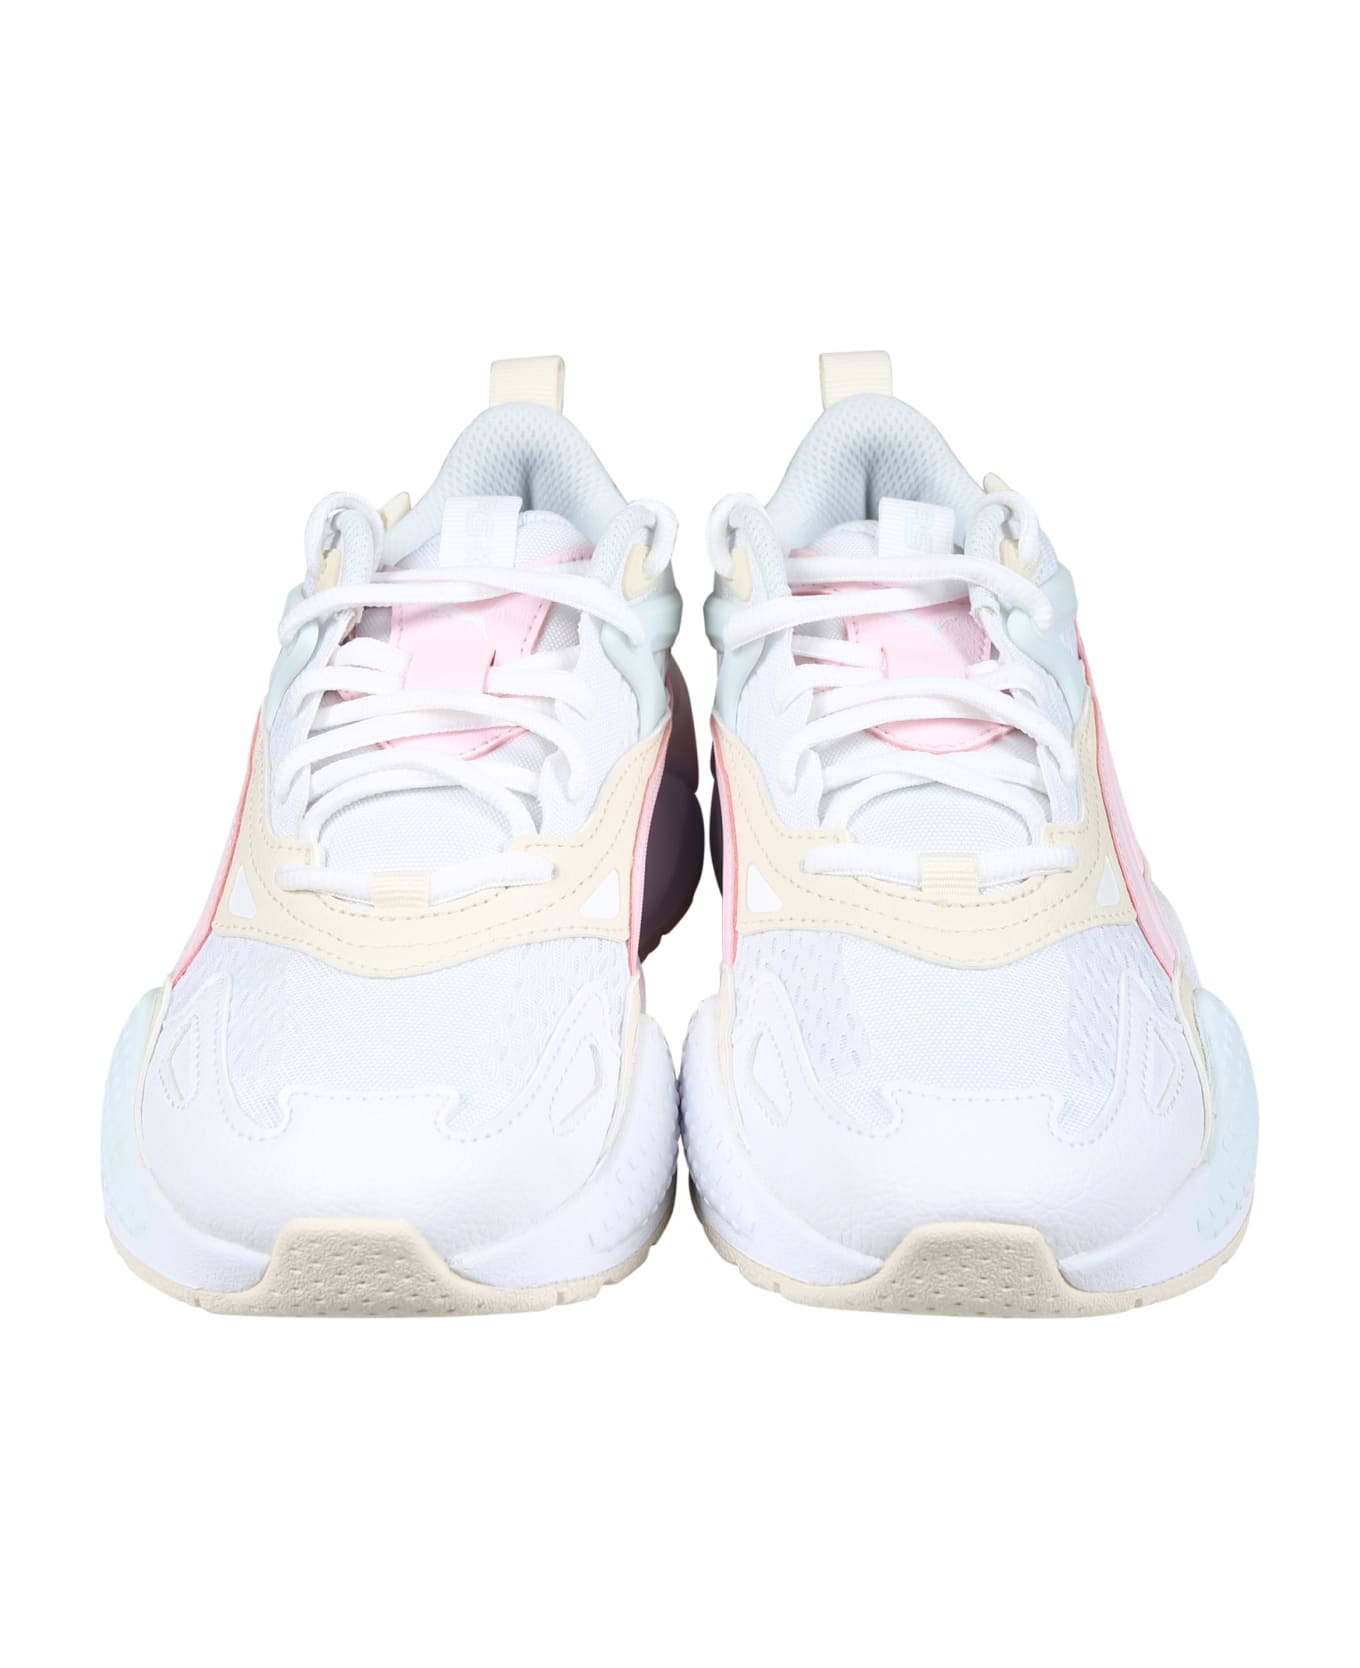 Puma Rs-x Efekt White Low Sneakers For Girl - White